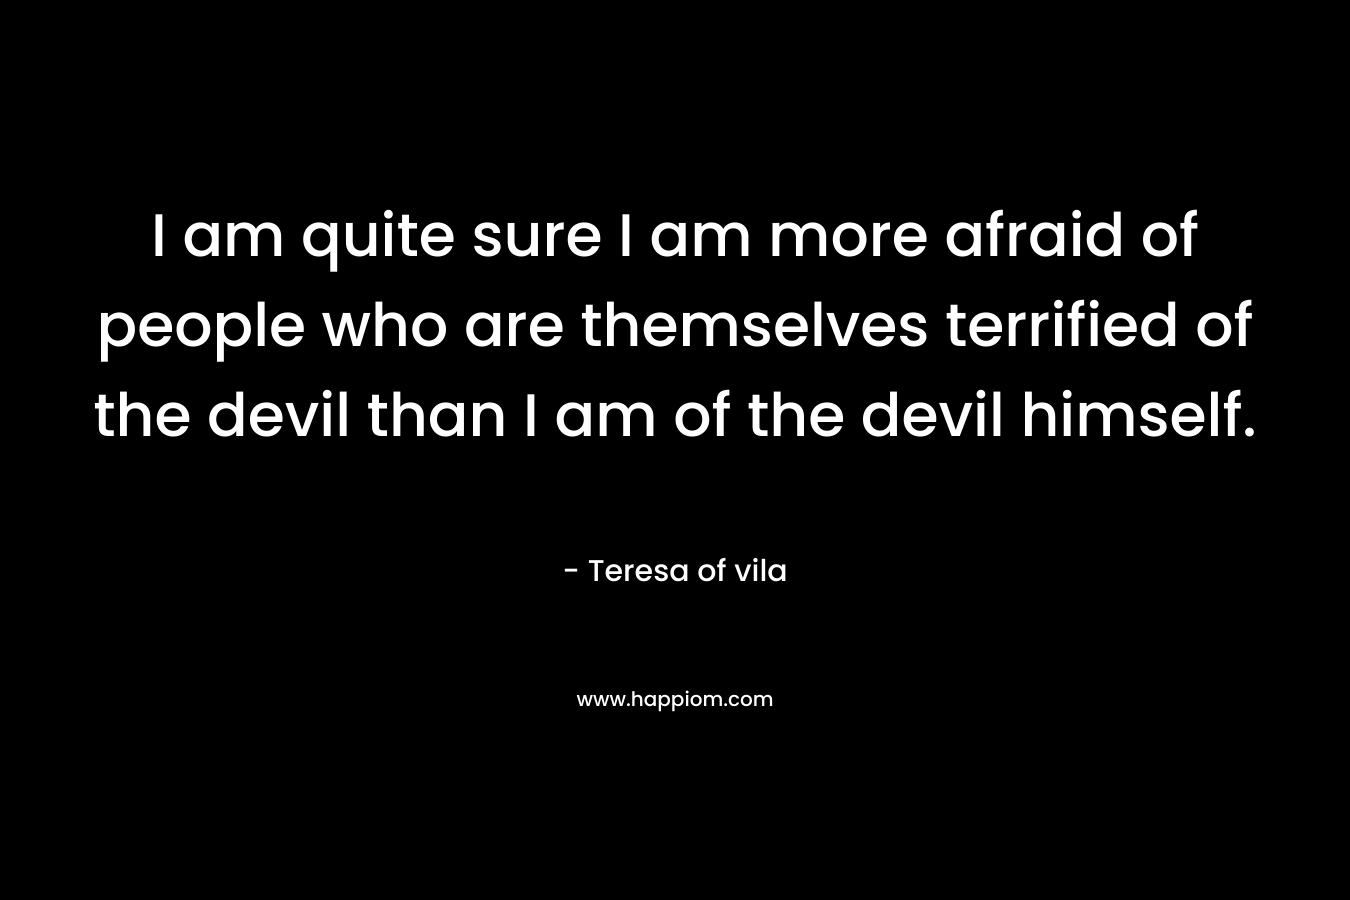 I am quite sure I am more afraid of people who are themselves terrified of the devil than I am of the devil himself. – Teresa of vila